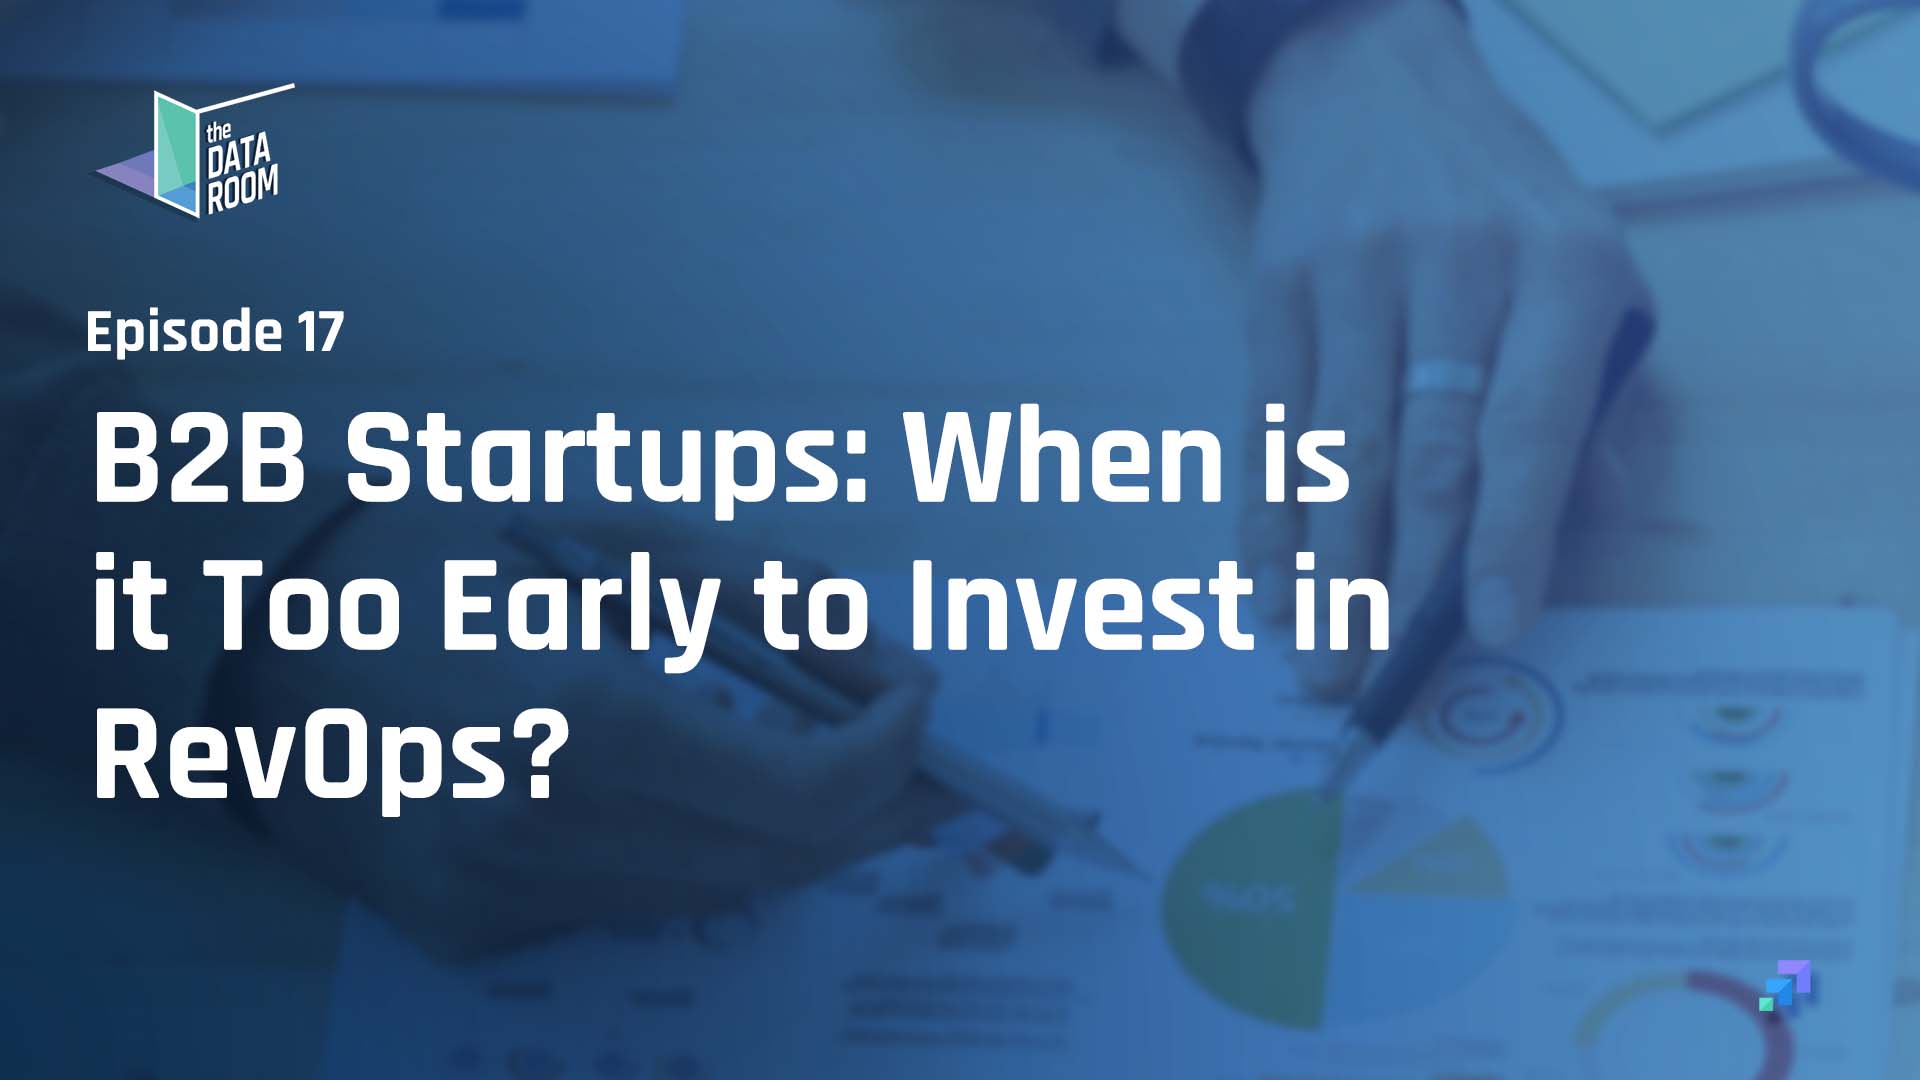 B2B Startups: When is it Too Early to Invest in RevOps?